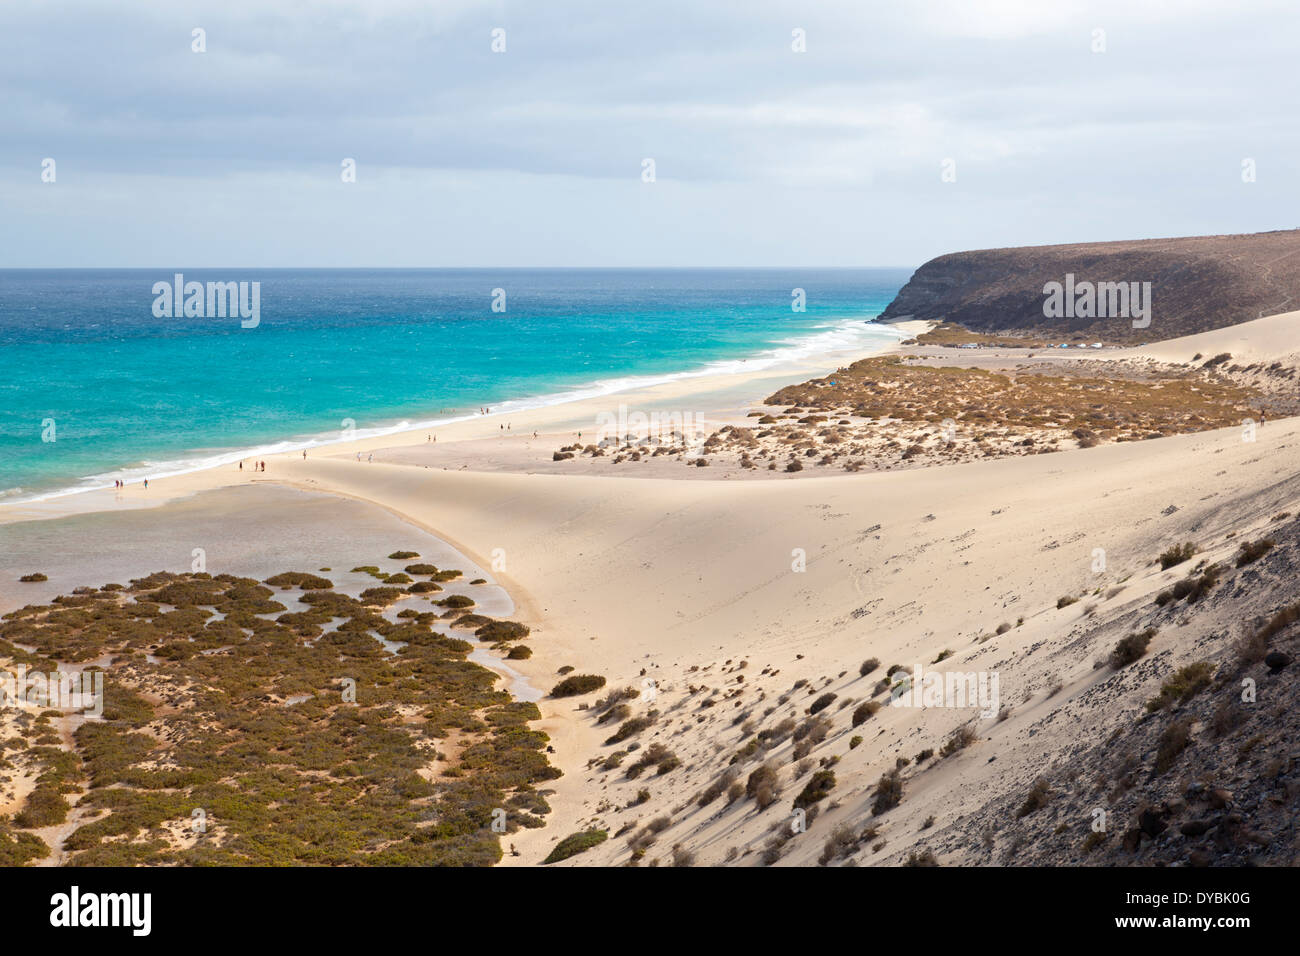 Playa de Sotavento with its beautiful lagoon and some tourists next to a large dune. Stock Photo